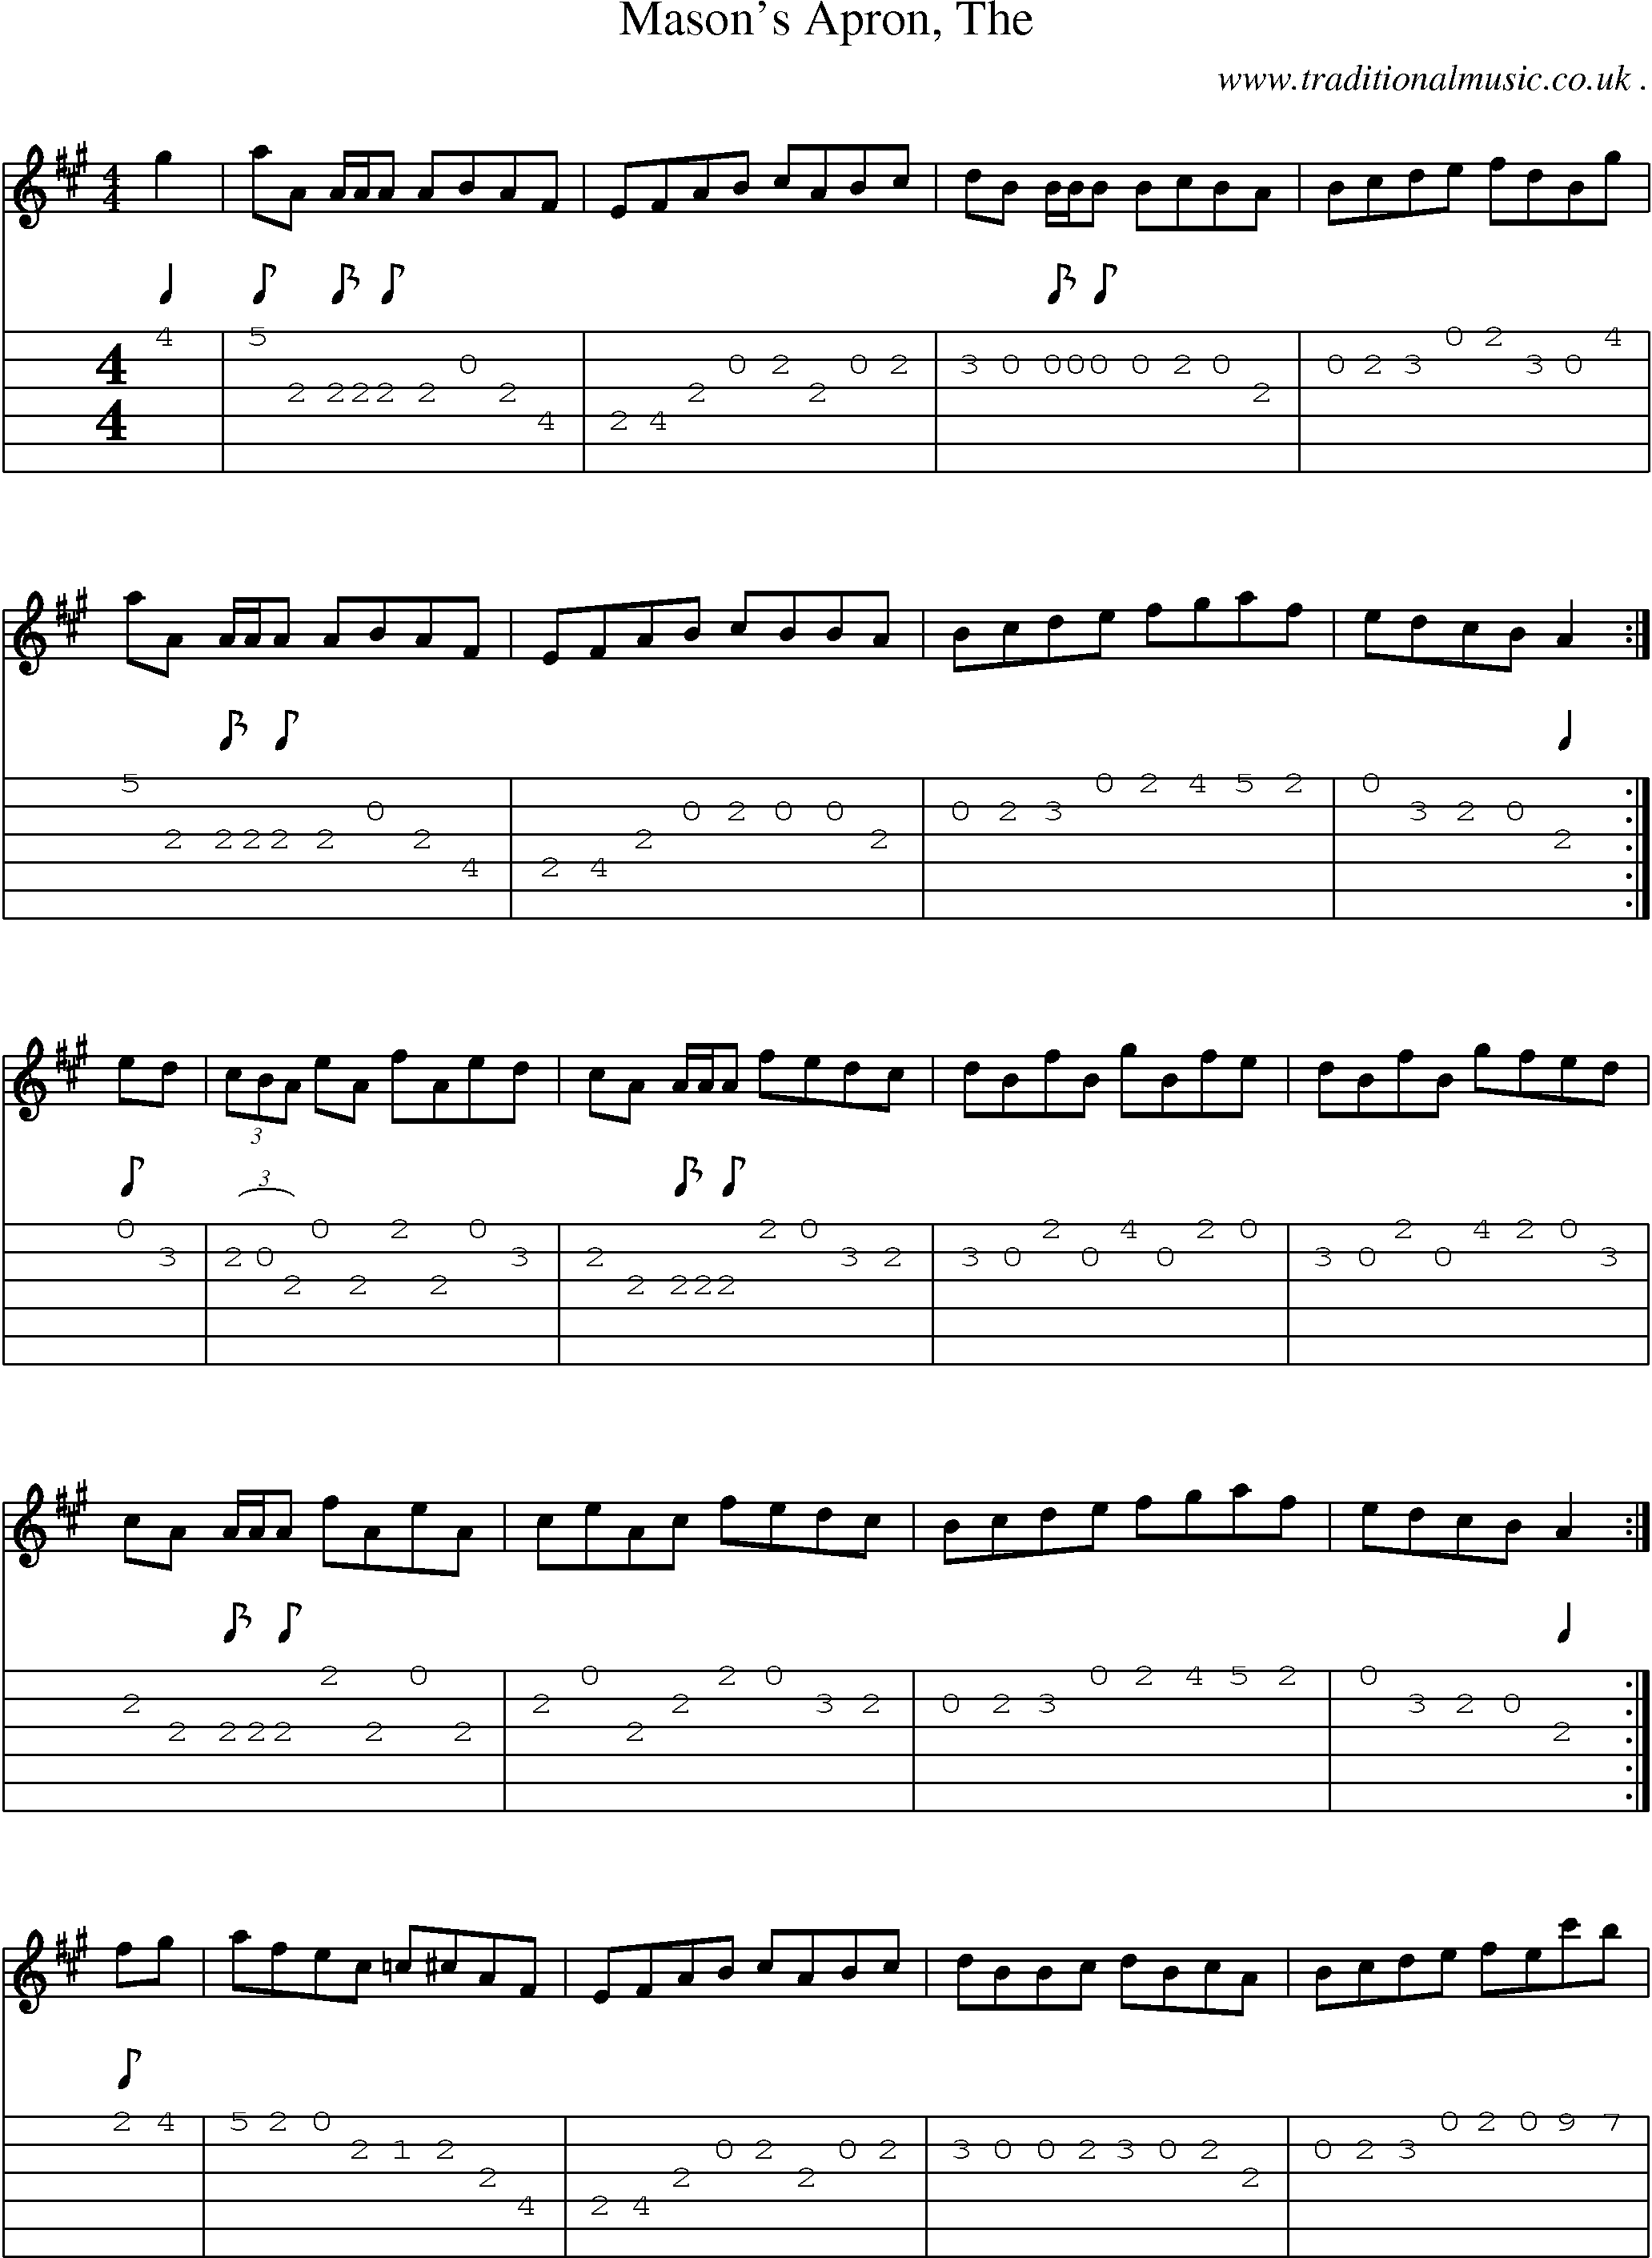 Sheet-music  score, Chords and Guitar Tabs for Masons Apron The